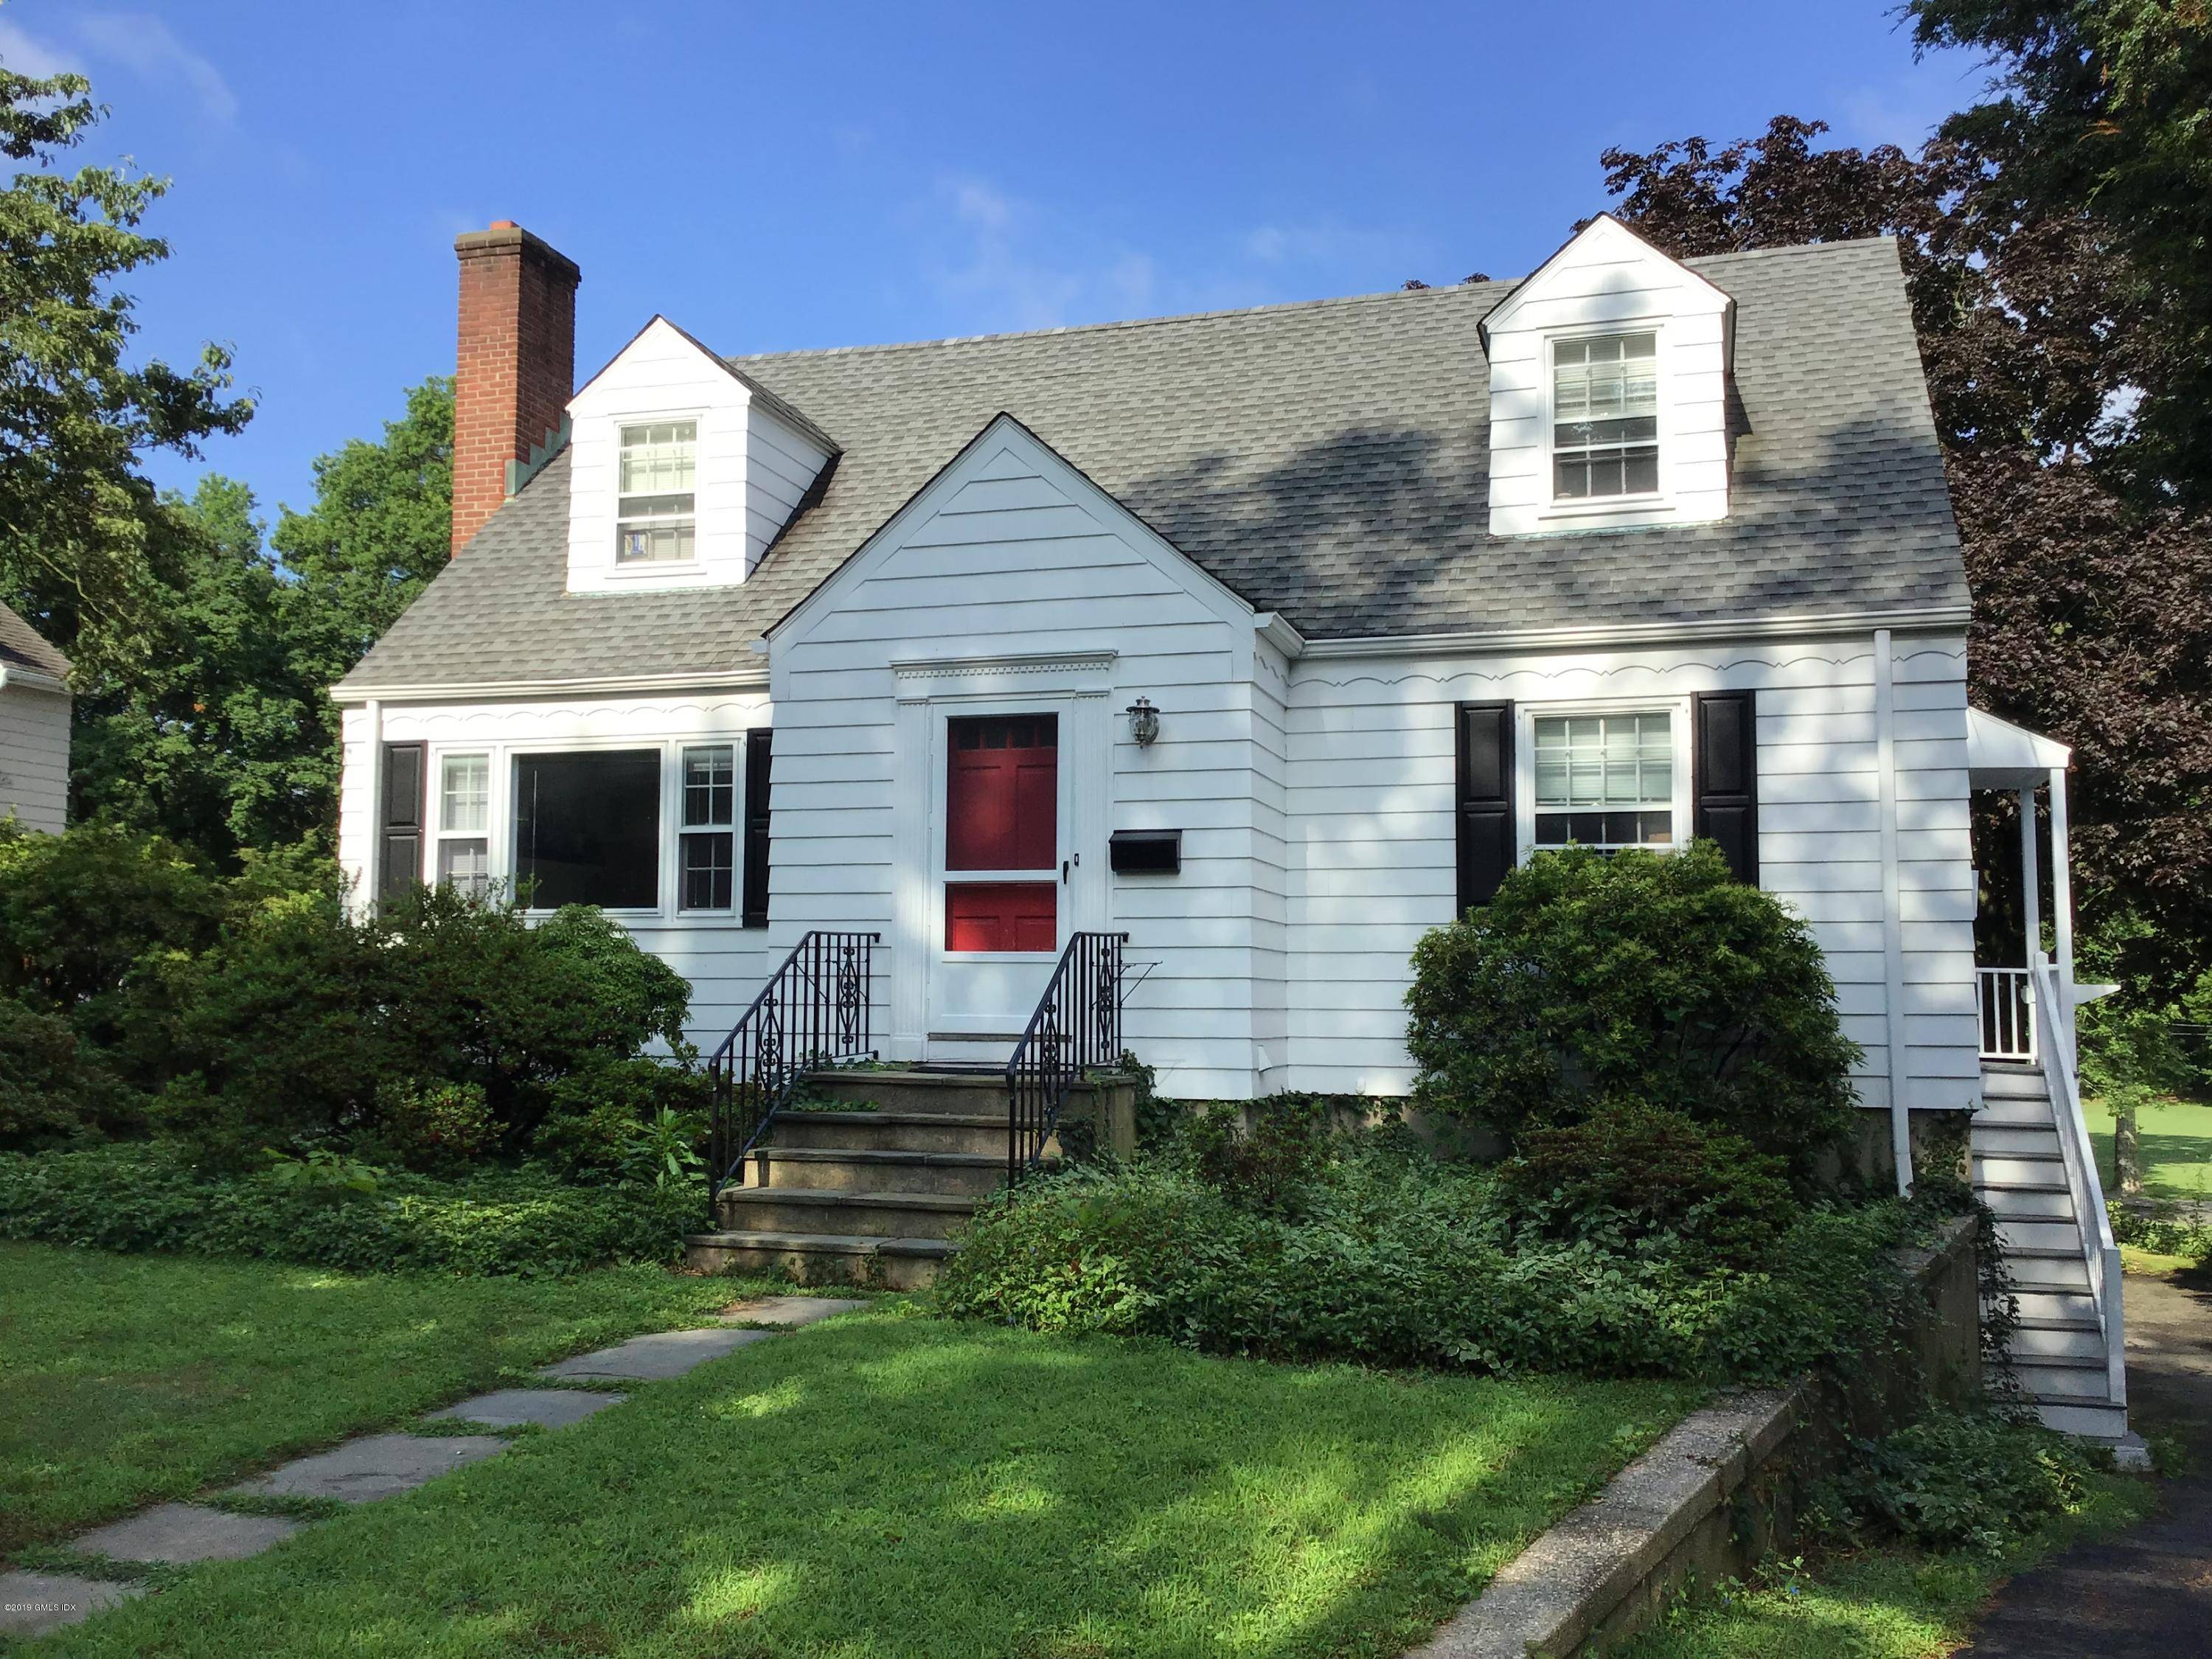 A sunny classic colonial with charming details in an ideal location the heart of Cos Cob.